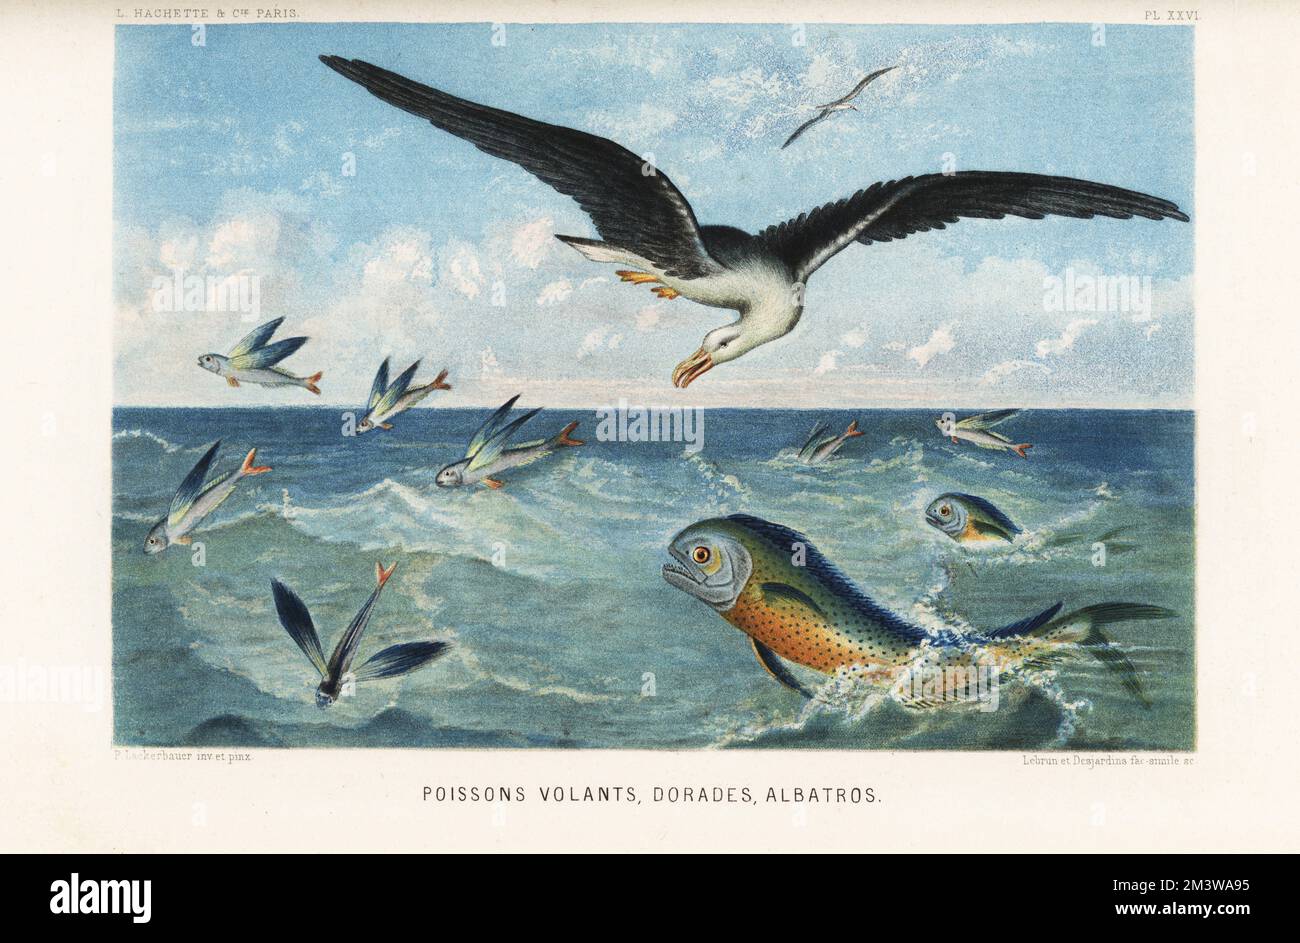 Flying fish, Exocoetus volitans, gilt-head sea bream, Sparus aurata, and albatross, Diomedea exulans. Poissons volants, dorades, albatros. Chromolithograph by Lebrun and Desjardins after Pierre Lackerbauer from Alfred Fredol’s Le Monde de la Mer, the World of the Sea, edited by Olivier Fredol, Librairie Hachette et. Cie., Paris, 1881. Alfred Fredol was the pseudonym of French zoologist and botanist Alfred Moquin-Tandon, 1804-1863. Stock Photo